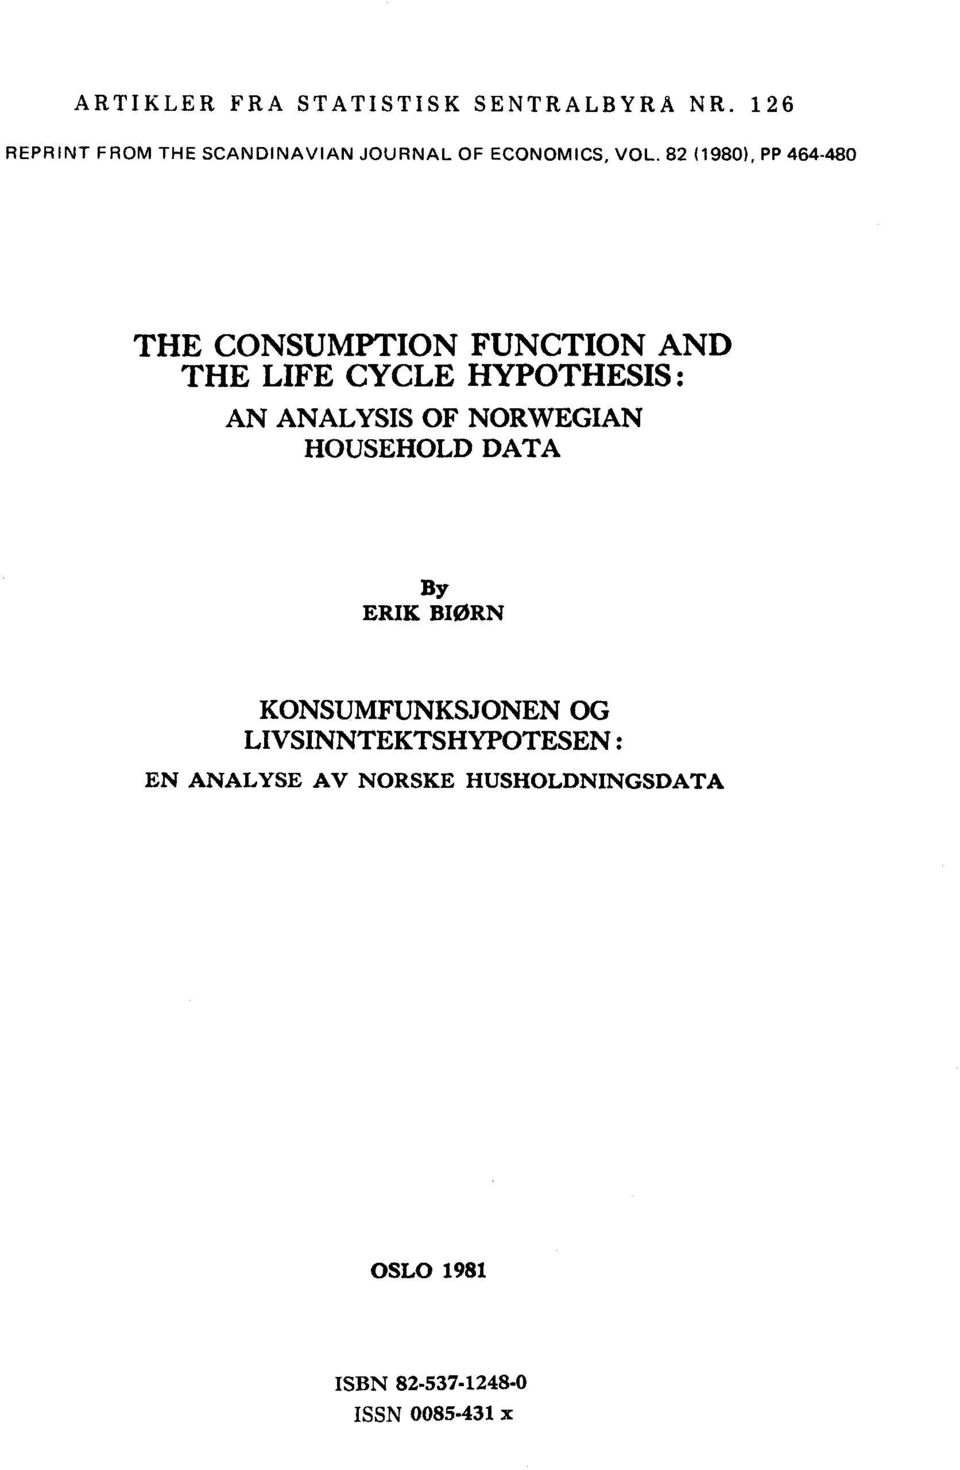 82 (1980), PP 464-480 THE CONSUMPTION FUNCTION AND THE LIFE CYCLE HYPOTHESIS AN ANALYSIS